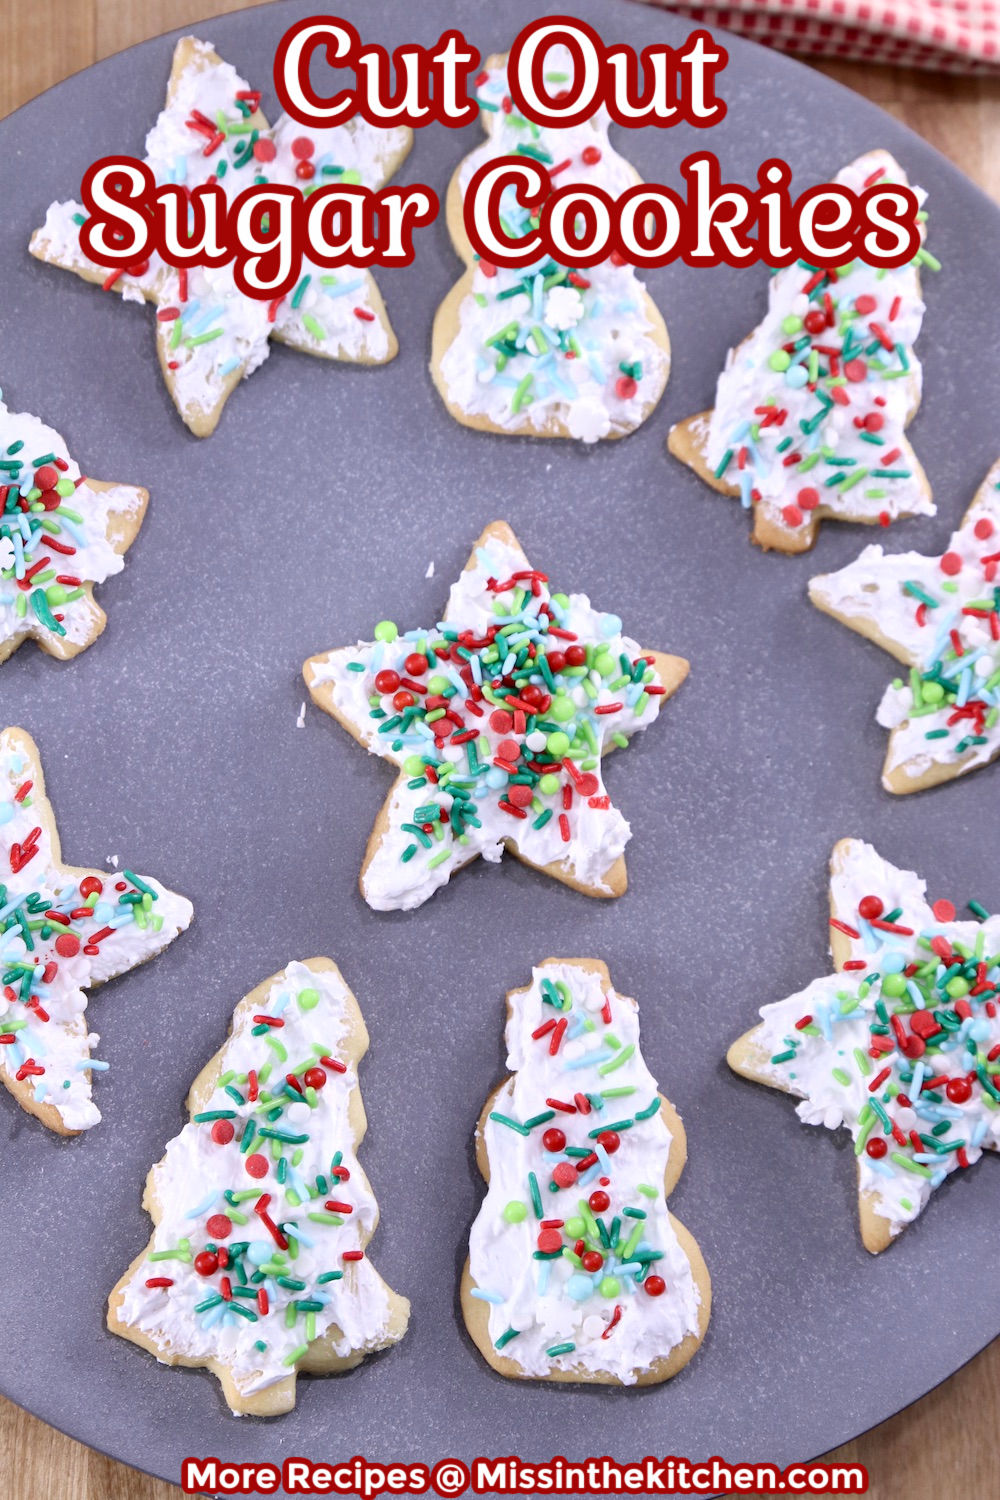 Cut Out Sugar Cookies with icing and sprinkles on a gray plate- text overlay